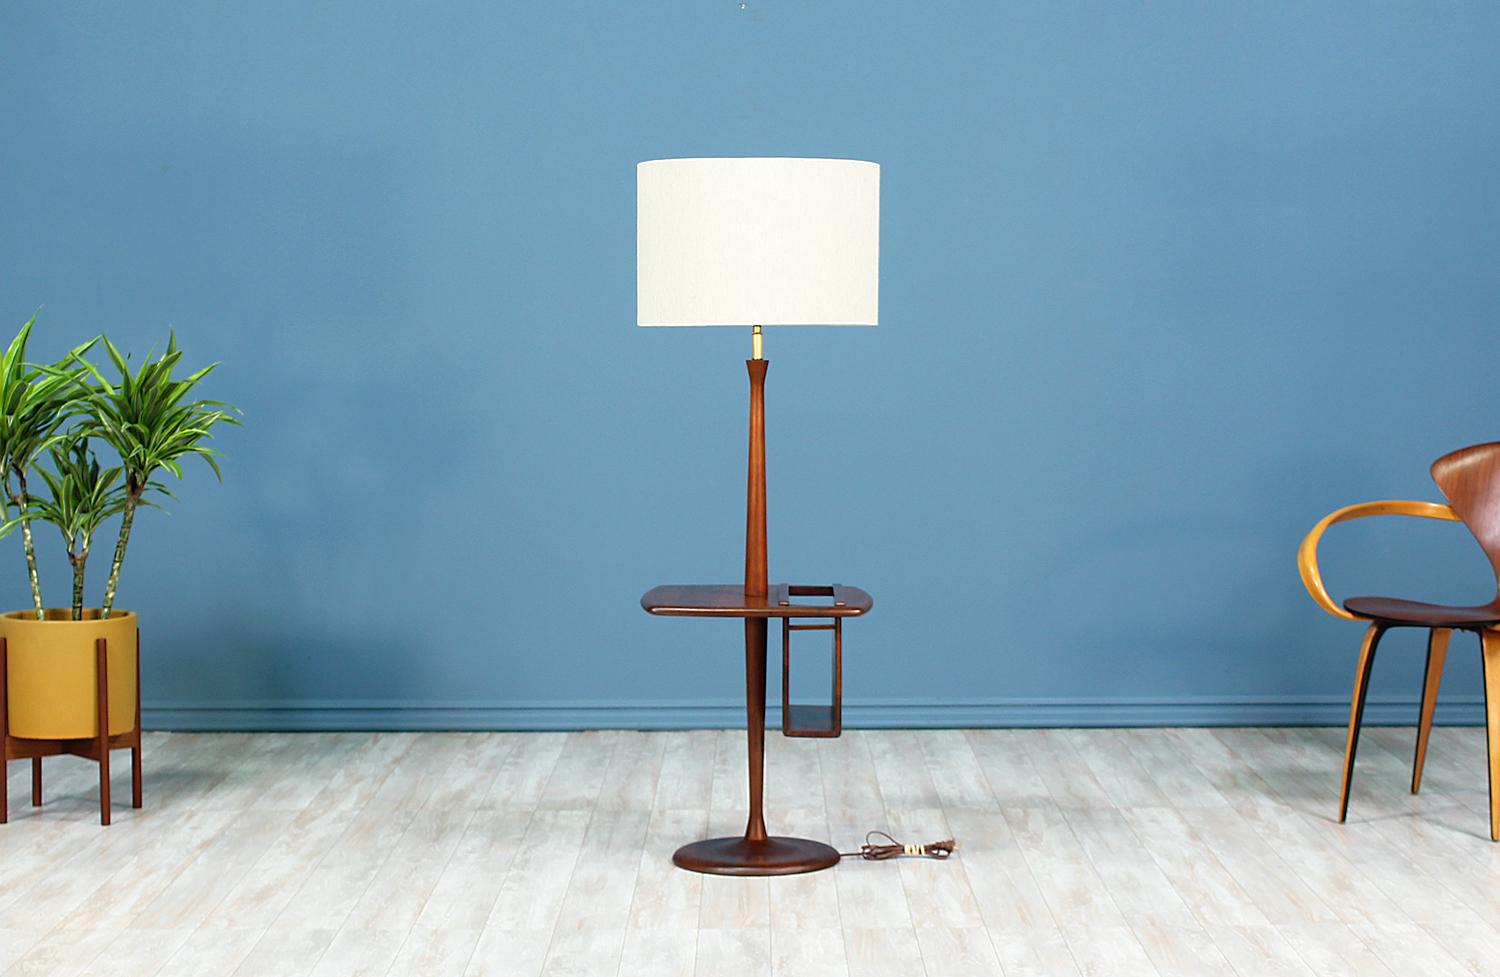 Floor Lamp designed and manufactured by Laurel Lamp Co. in the United States circa 1960’s. This beautiful Mid-Century Modern lamp features a tall walnut wood body with beautiful grain detail. A versatile and exclusive design that supports a small